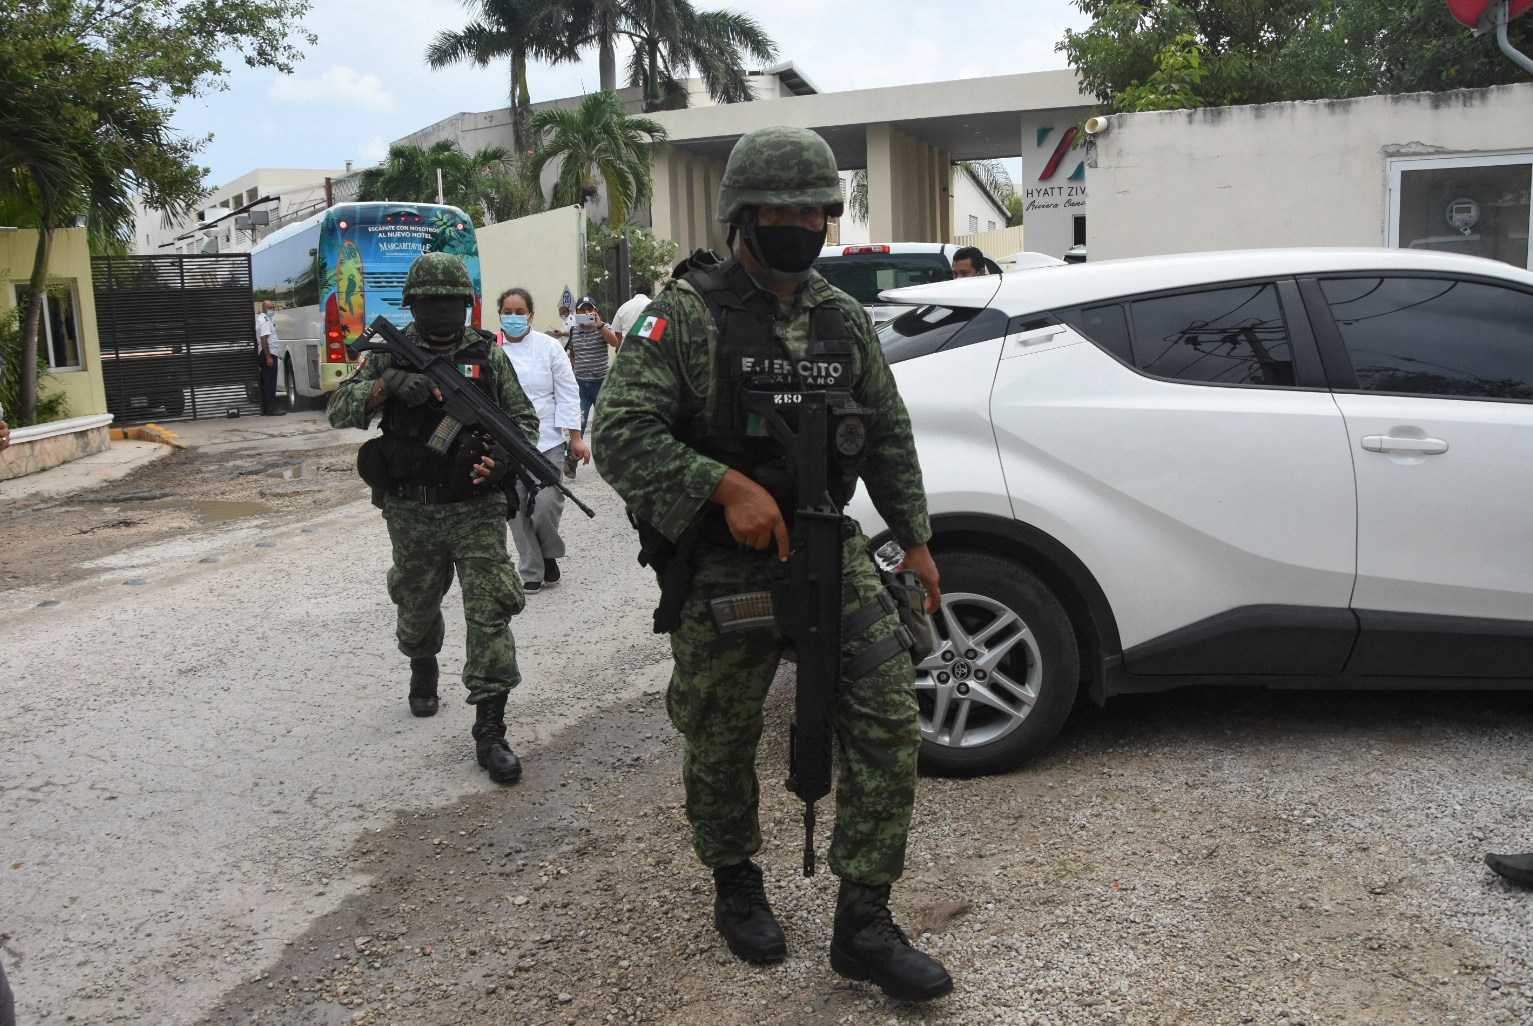 PHOTO: Mexican soldiers walk outside the Hyatt Ziva Riviera hotel in Puerto Morelos, Quintana Roo state, Mexico, on Nov. 4, 2021, after a shooting.